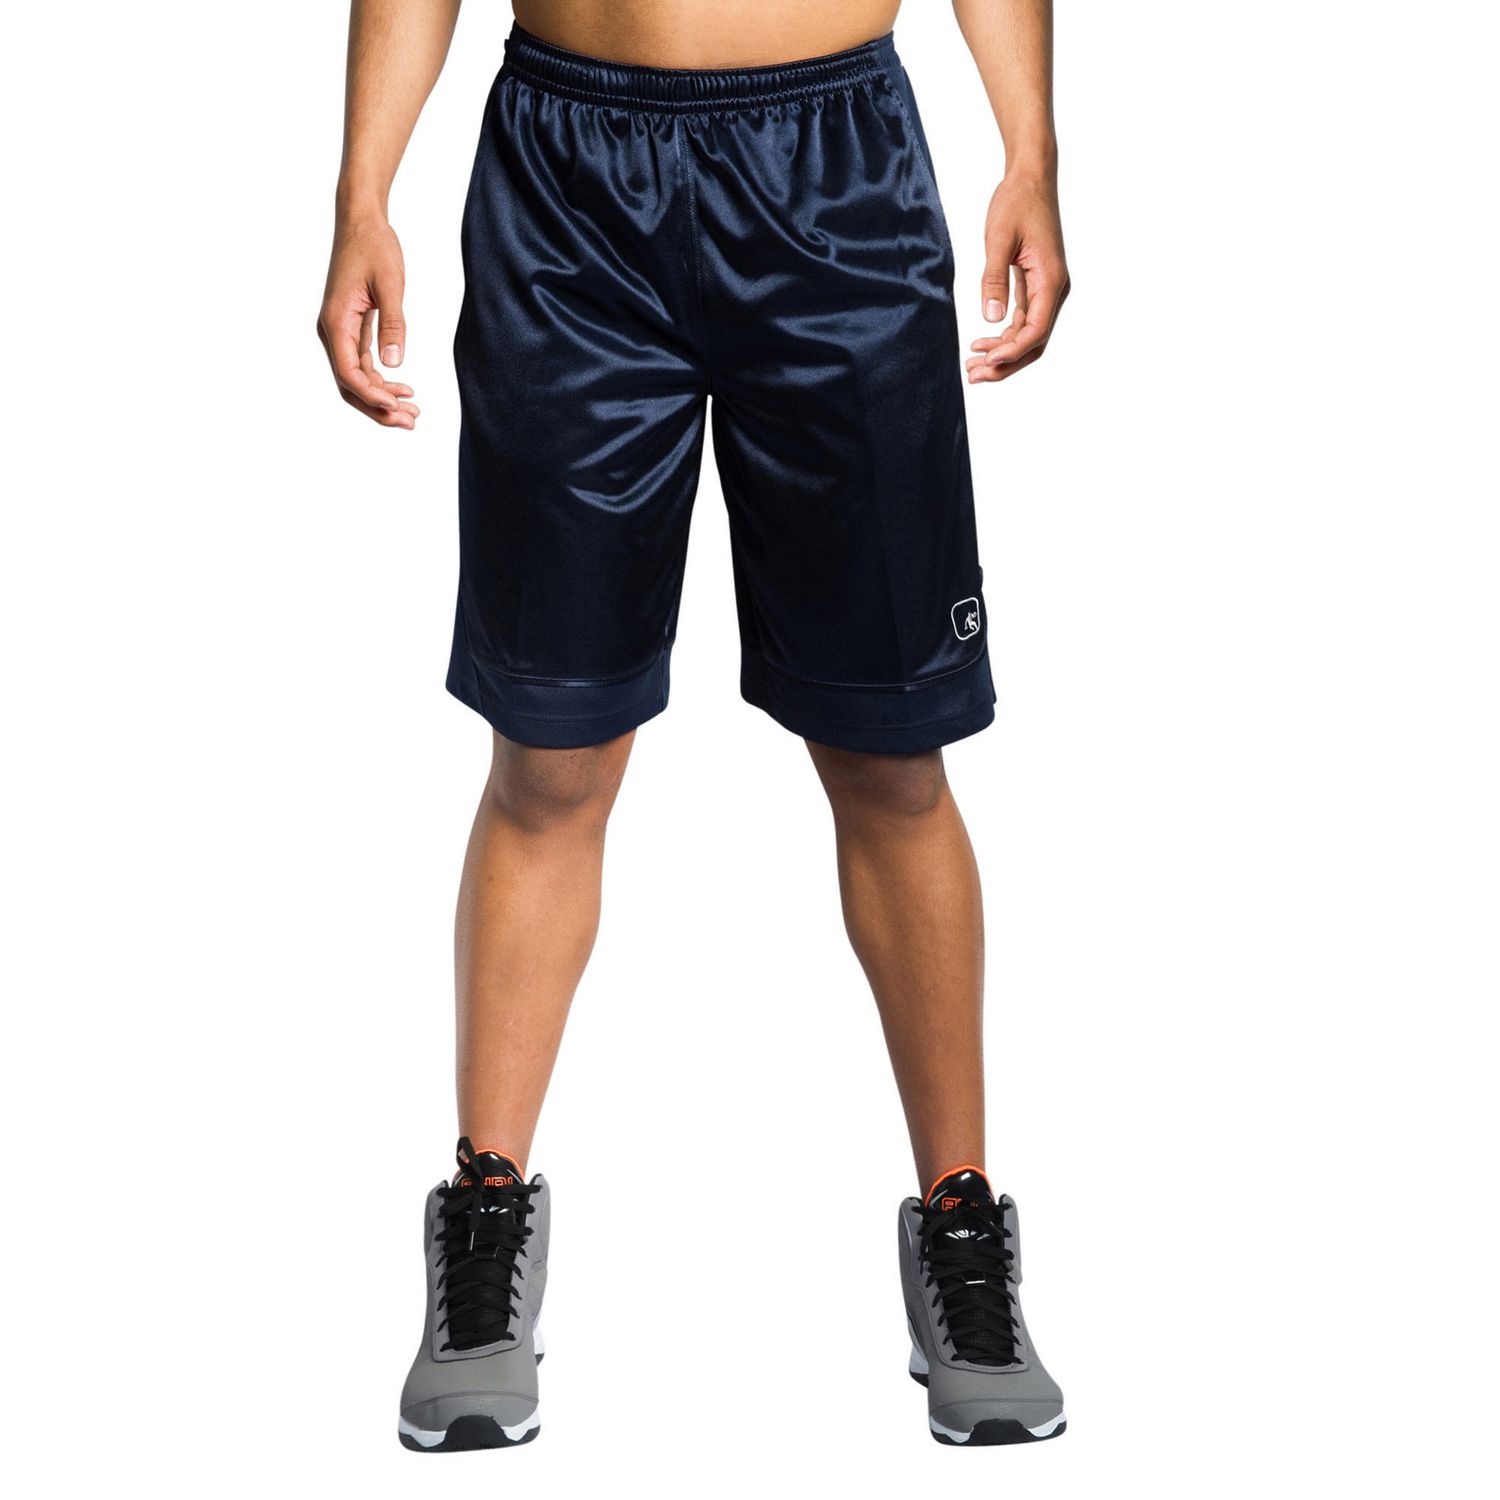 AND1 Men’s All Court Basketball Shorts | Walmart Canada